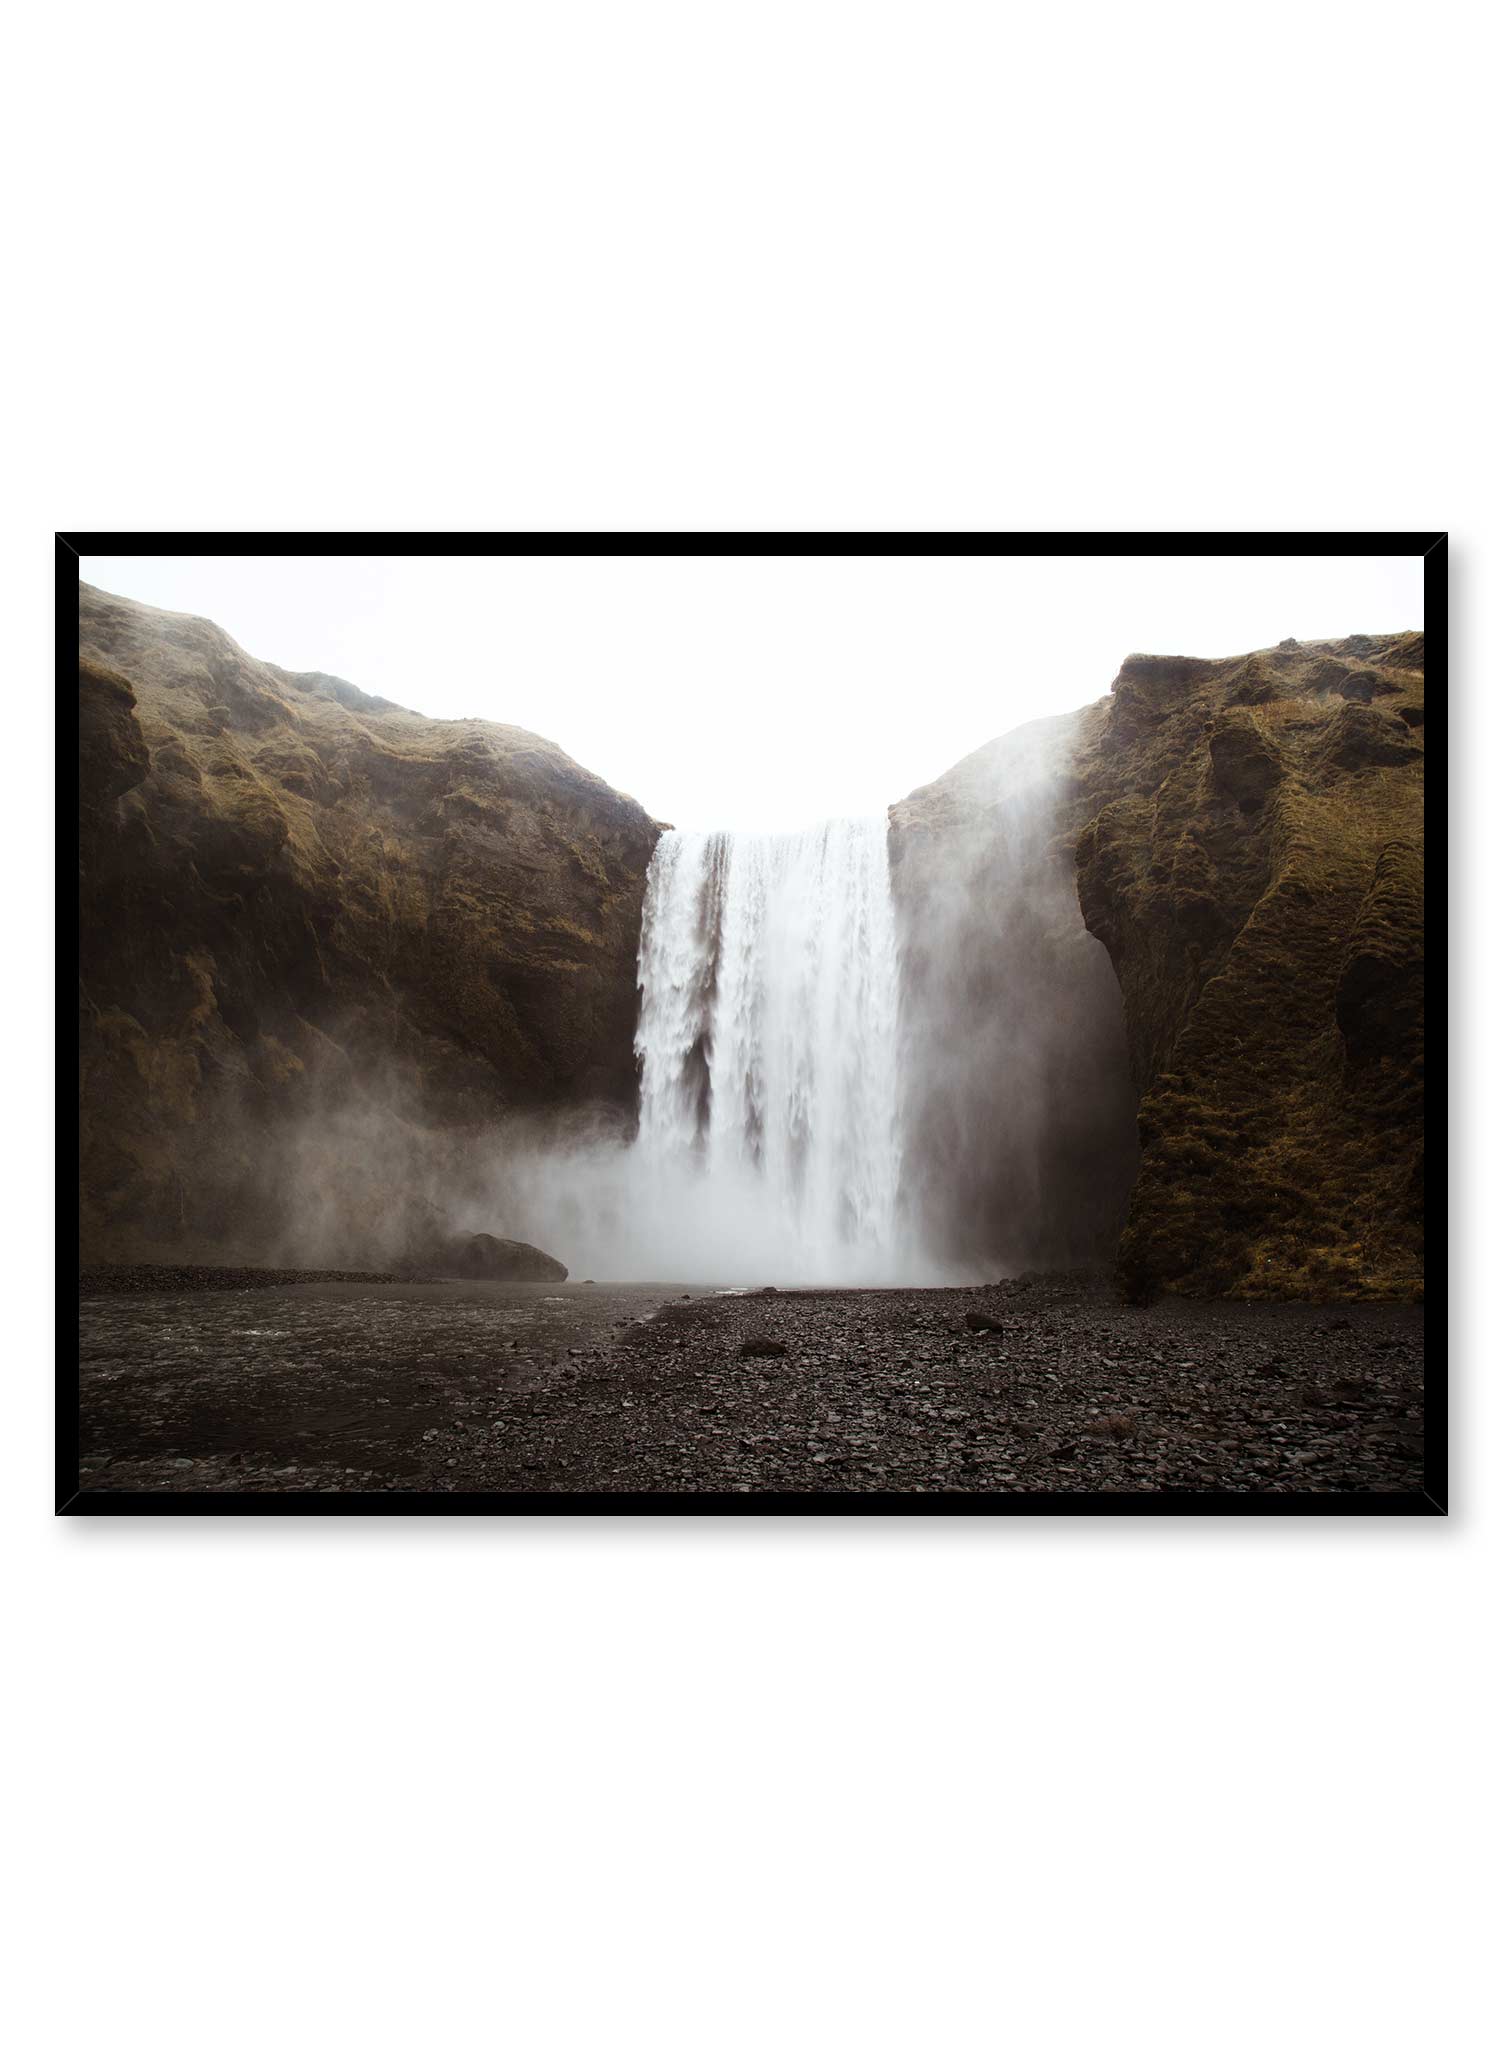 Cascading Scenery' is a landscape photography poster by Opposite Wall of beautiful waterfalls in Iceland.